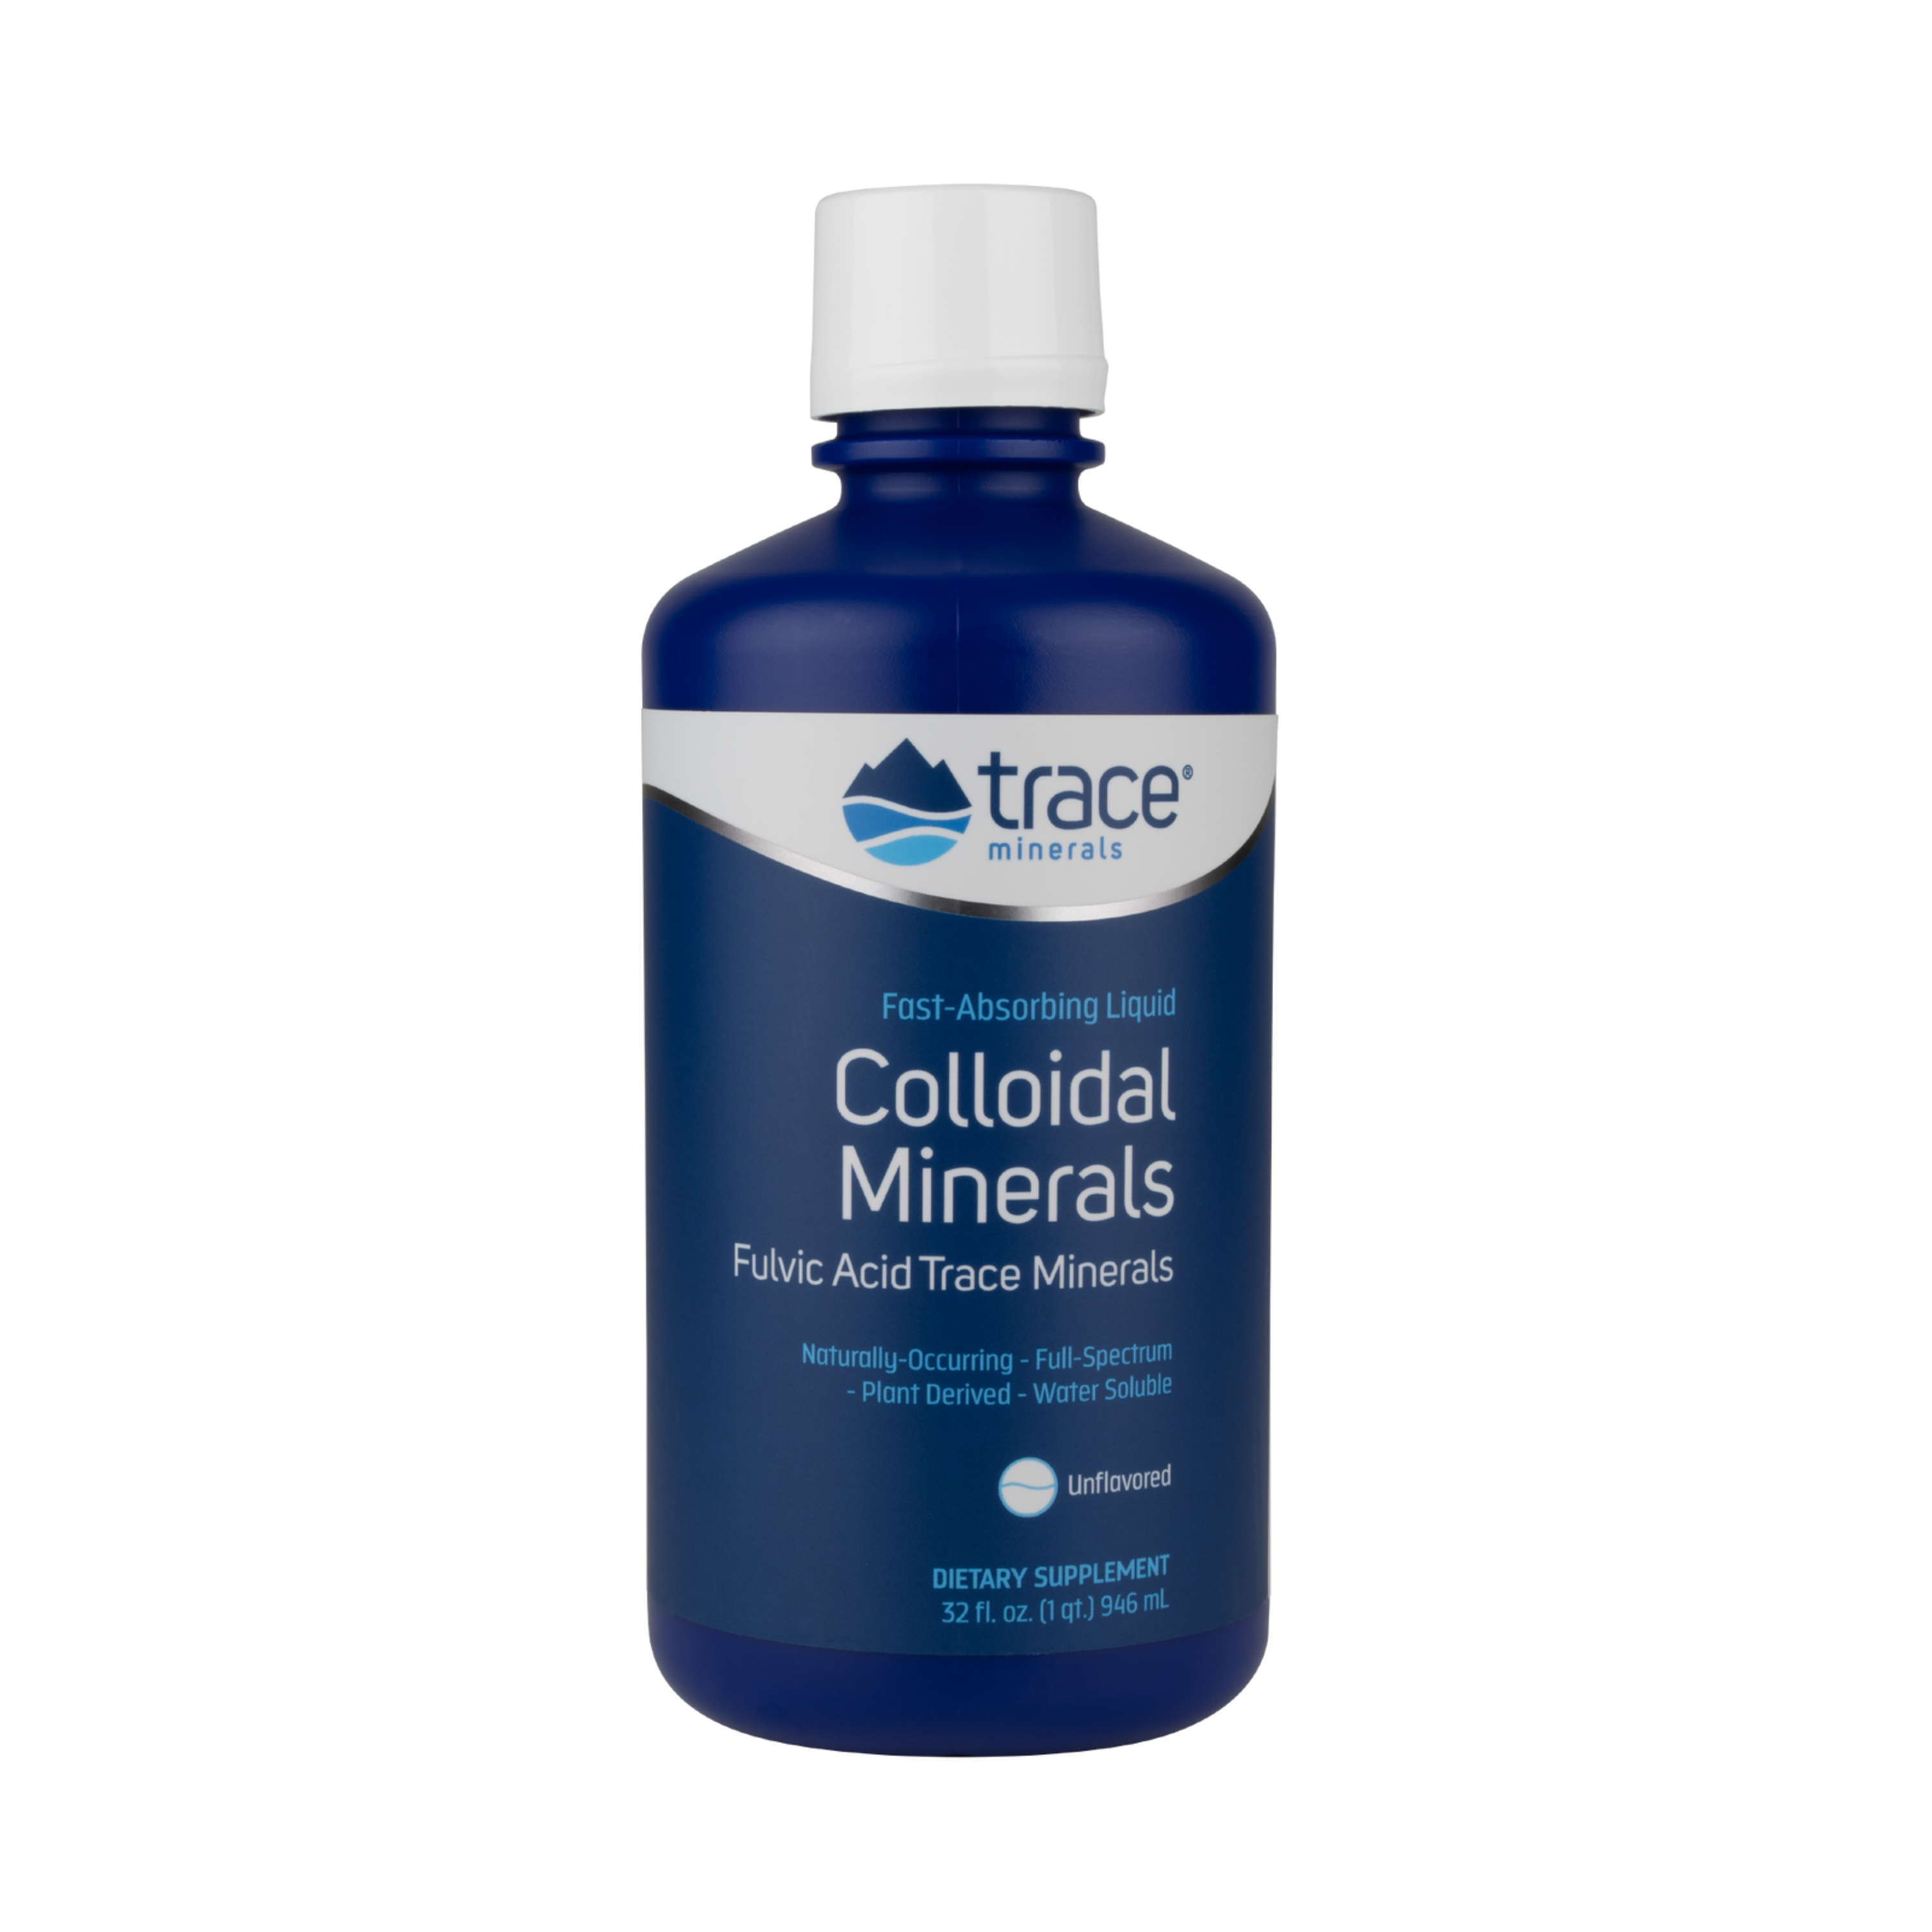 Colloidal Minerals Unflavored 946ml